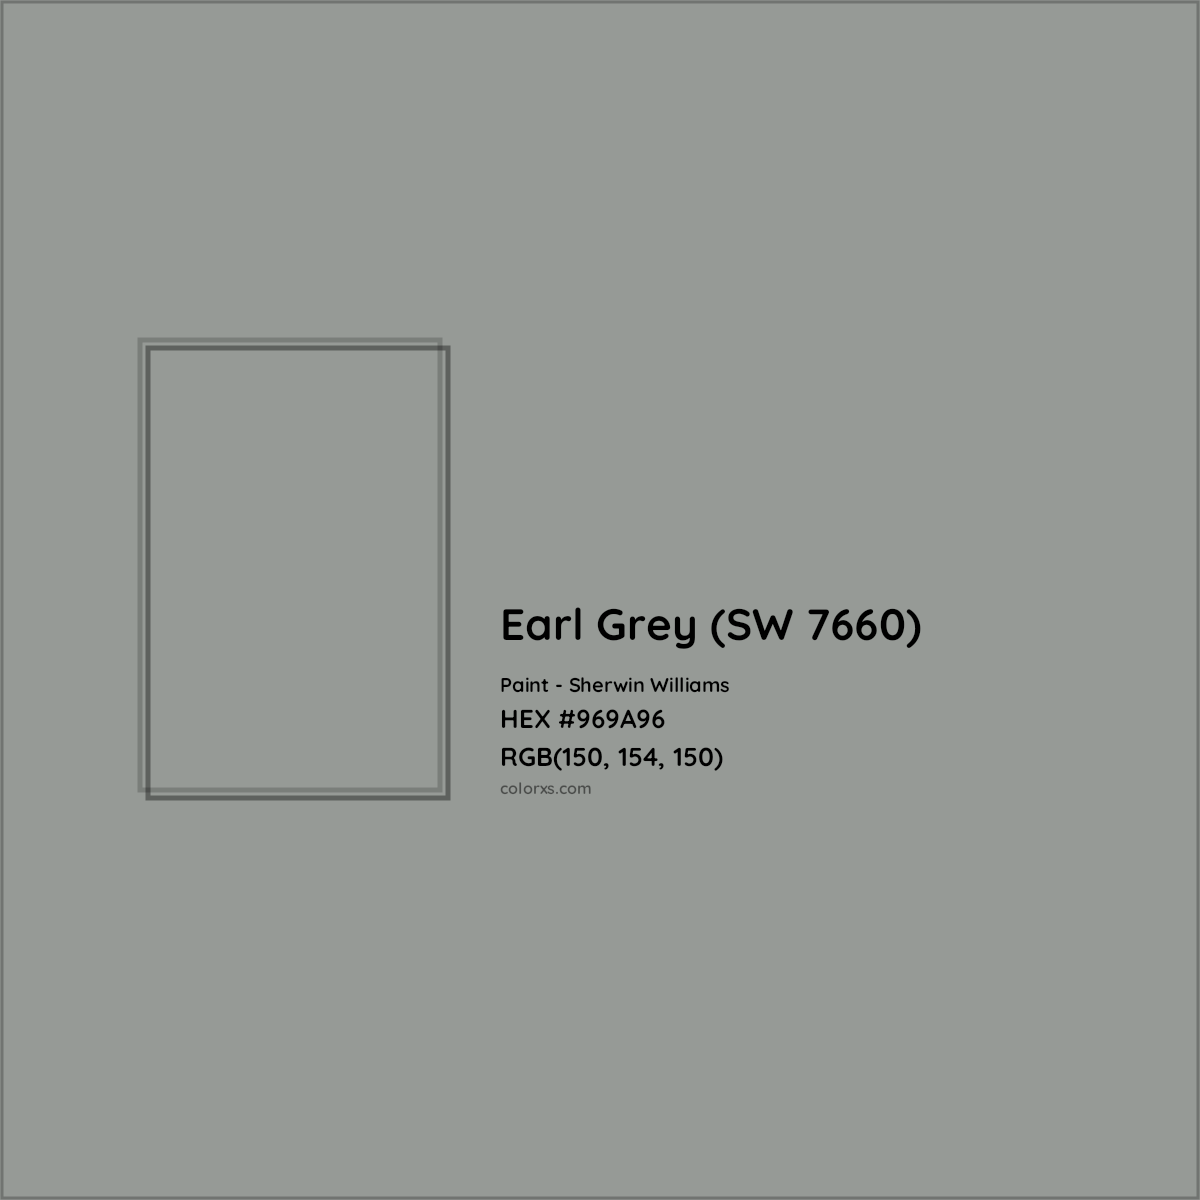 HEX #969A96 Earl Grey (SW 7660) Paint Sherwin Williams - Color Code